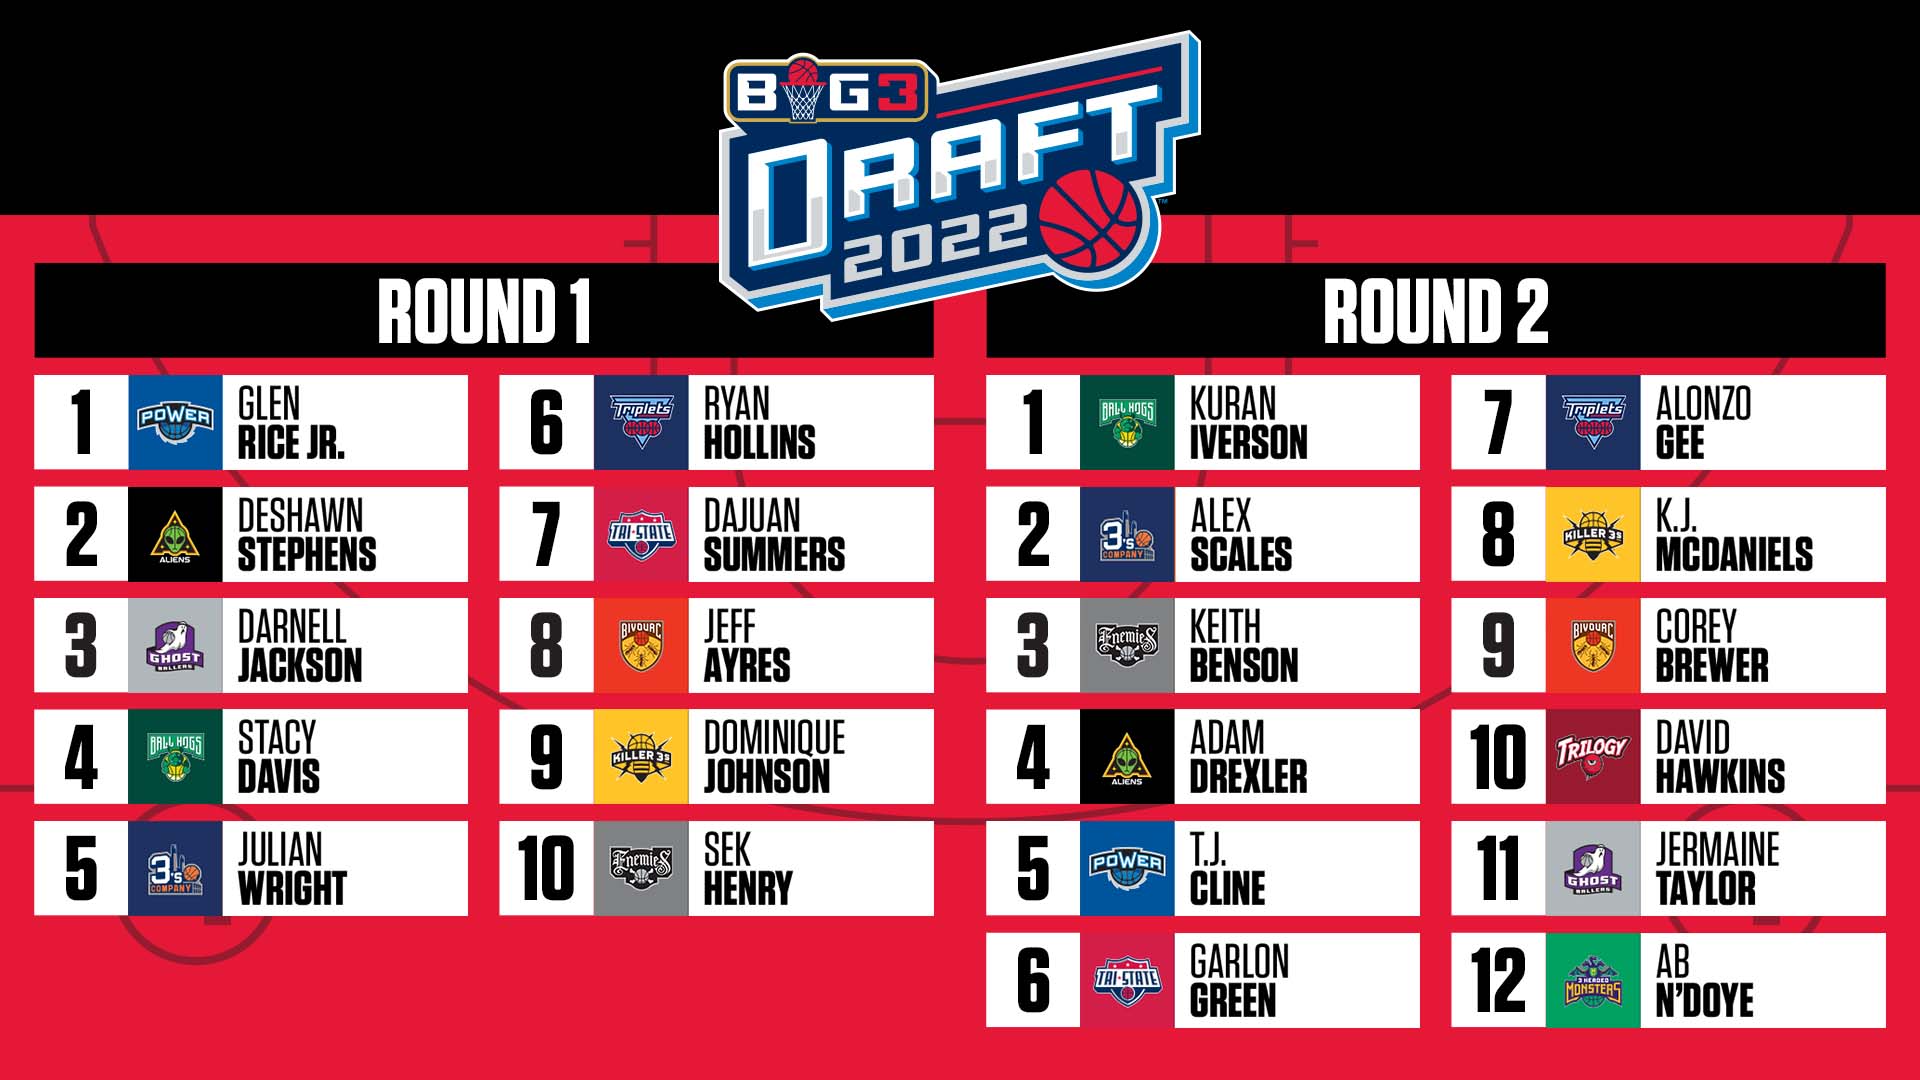 2022 NBA Draft Recap: 7 former mid-major players drafted in 1st